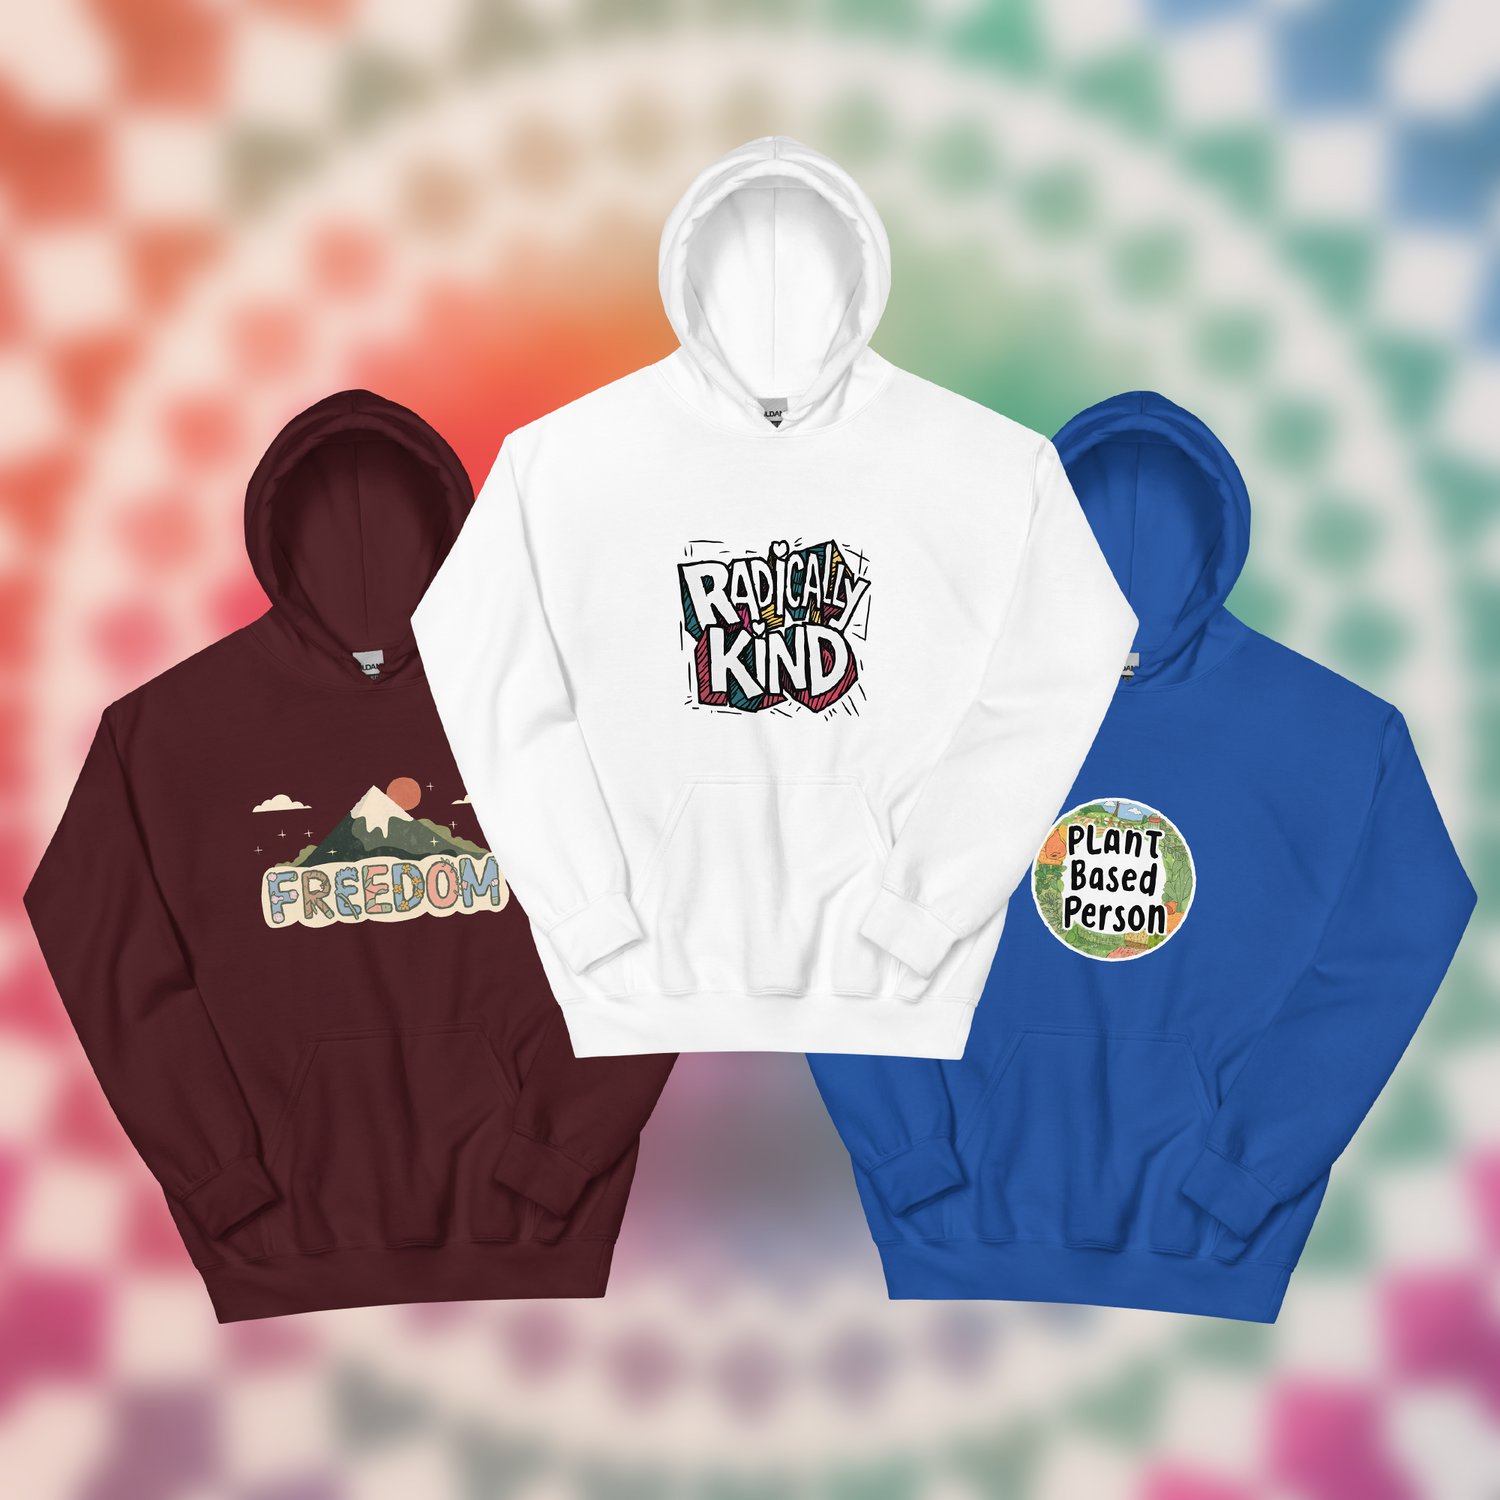 Three unisex hoodies in red, white, and blue colours displayed against a rainbow background